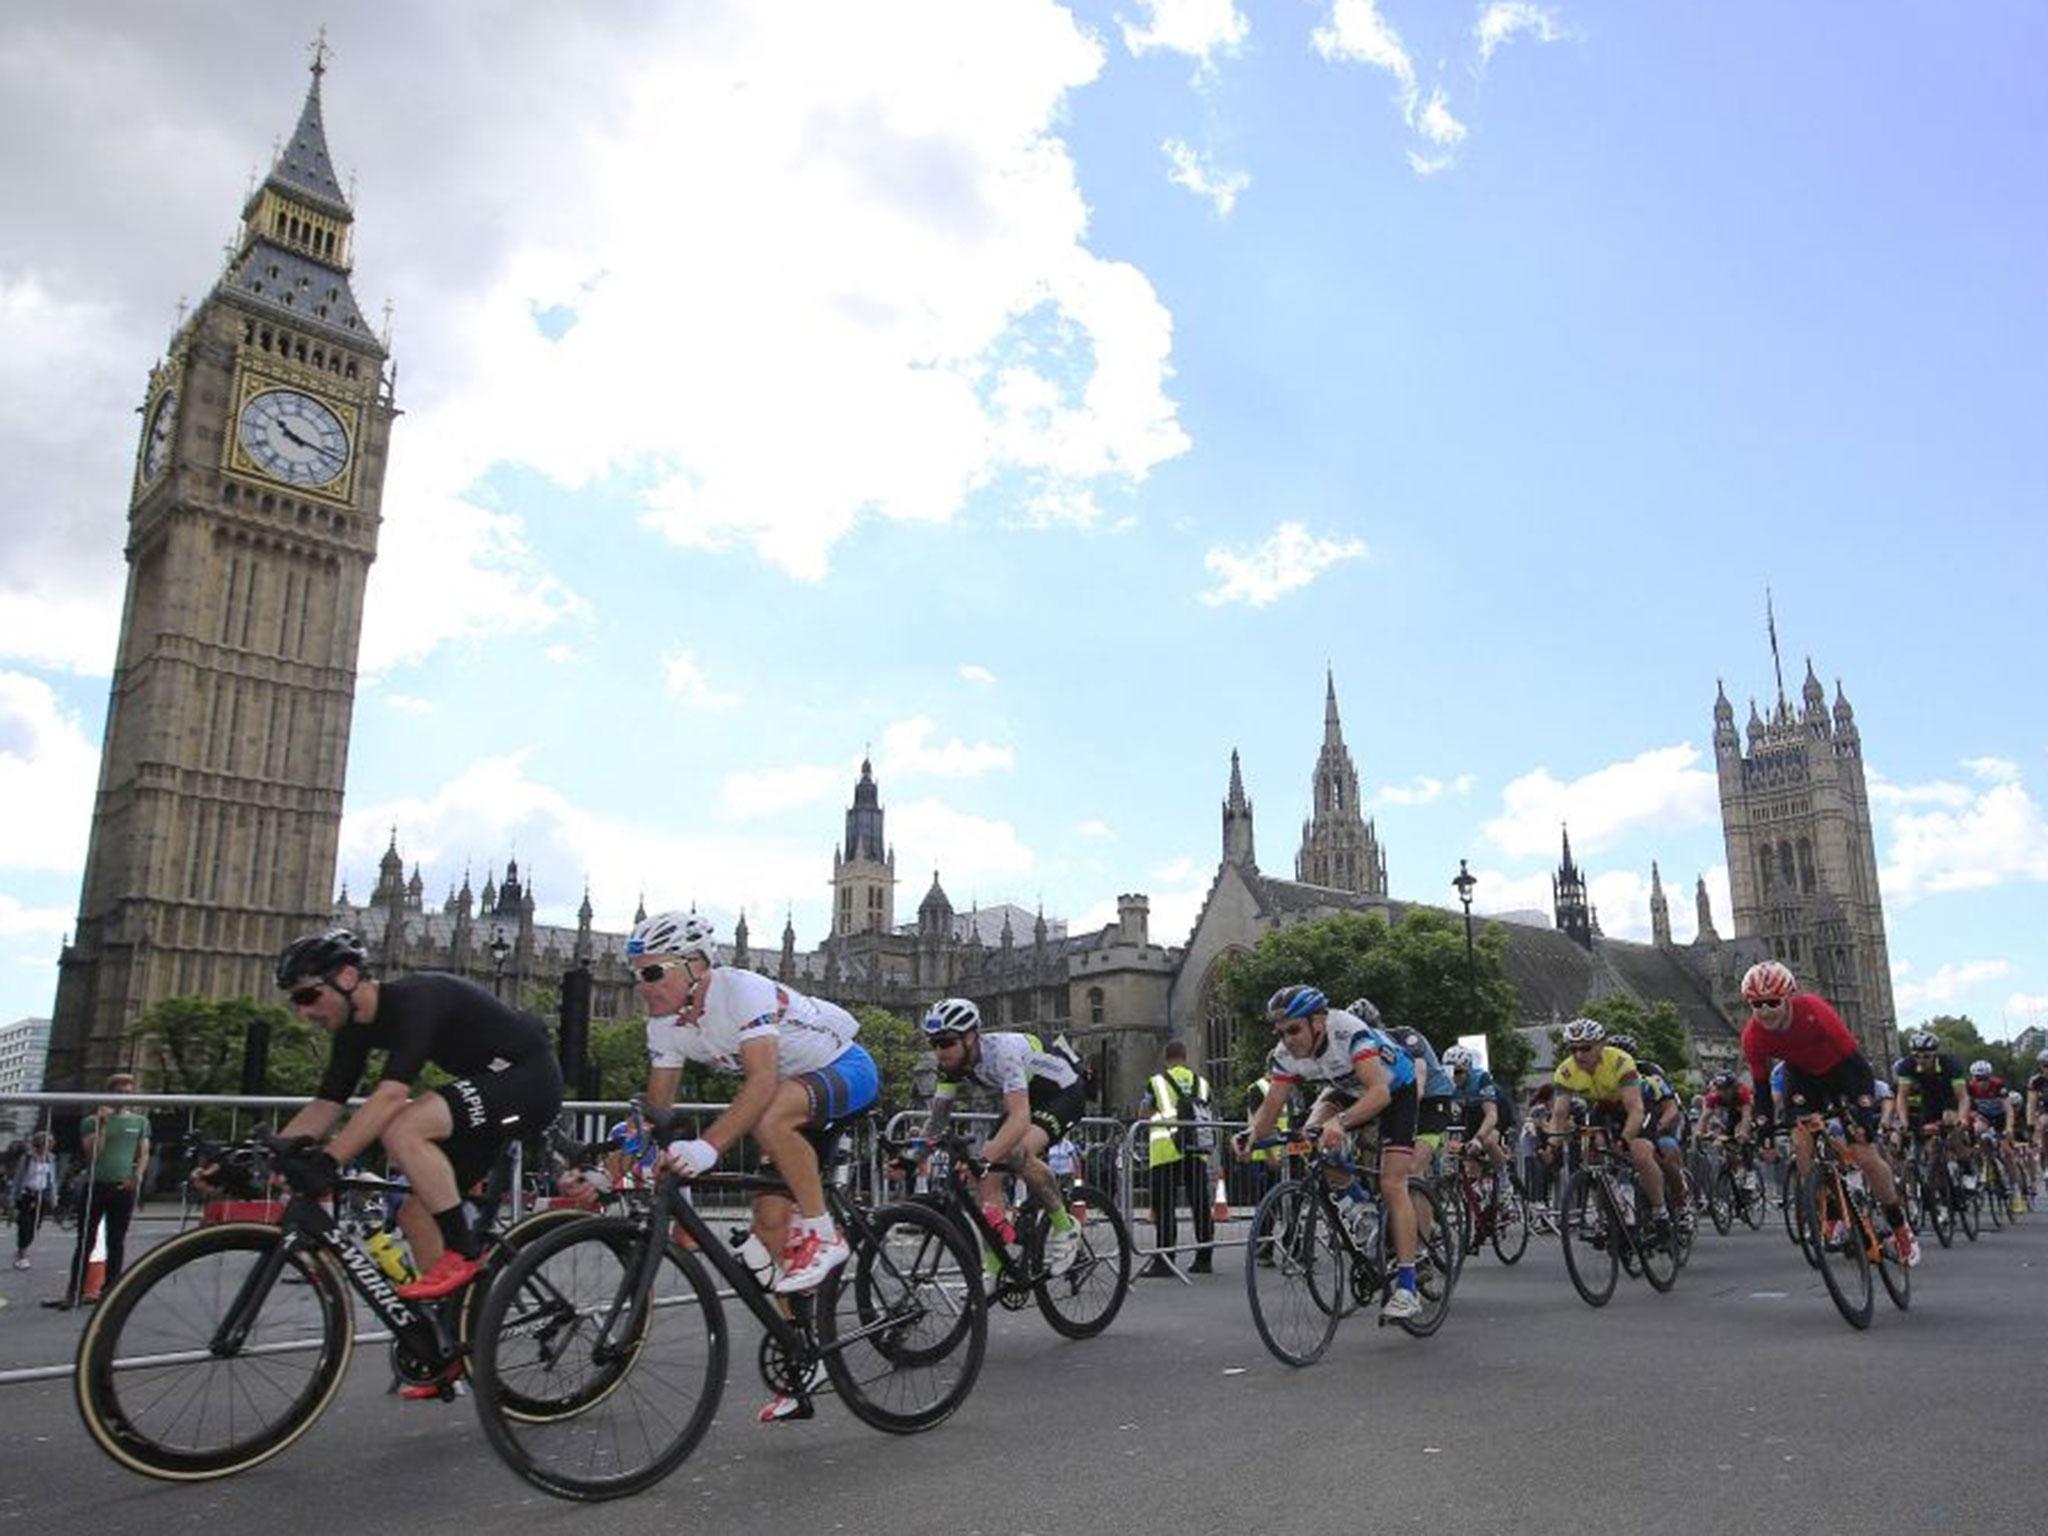 Cyclists pass the Palace of Westminster in the latter stages of the Prudential Ride 100